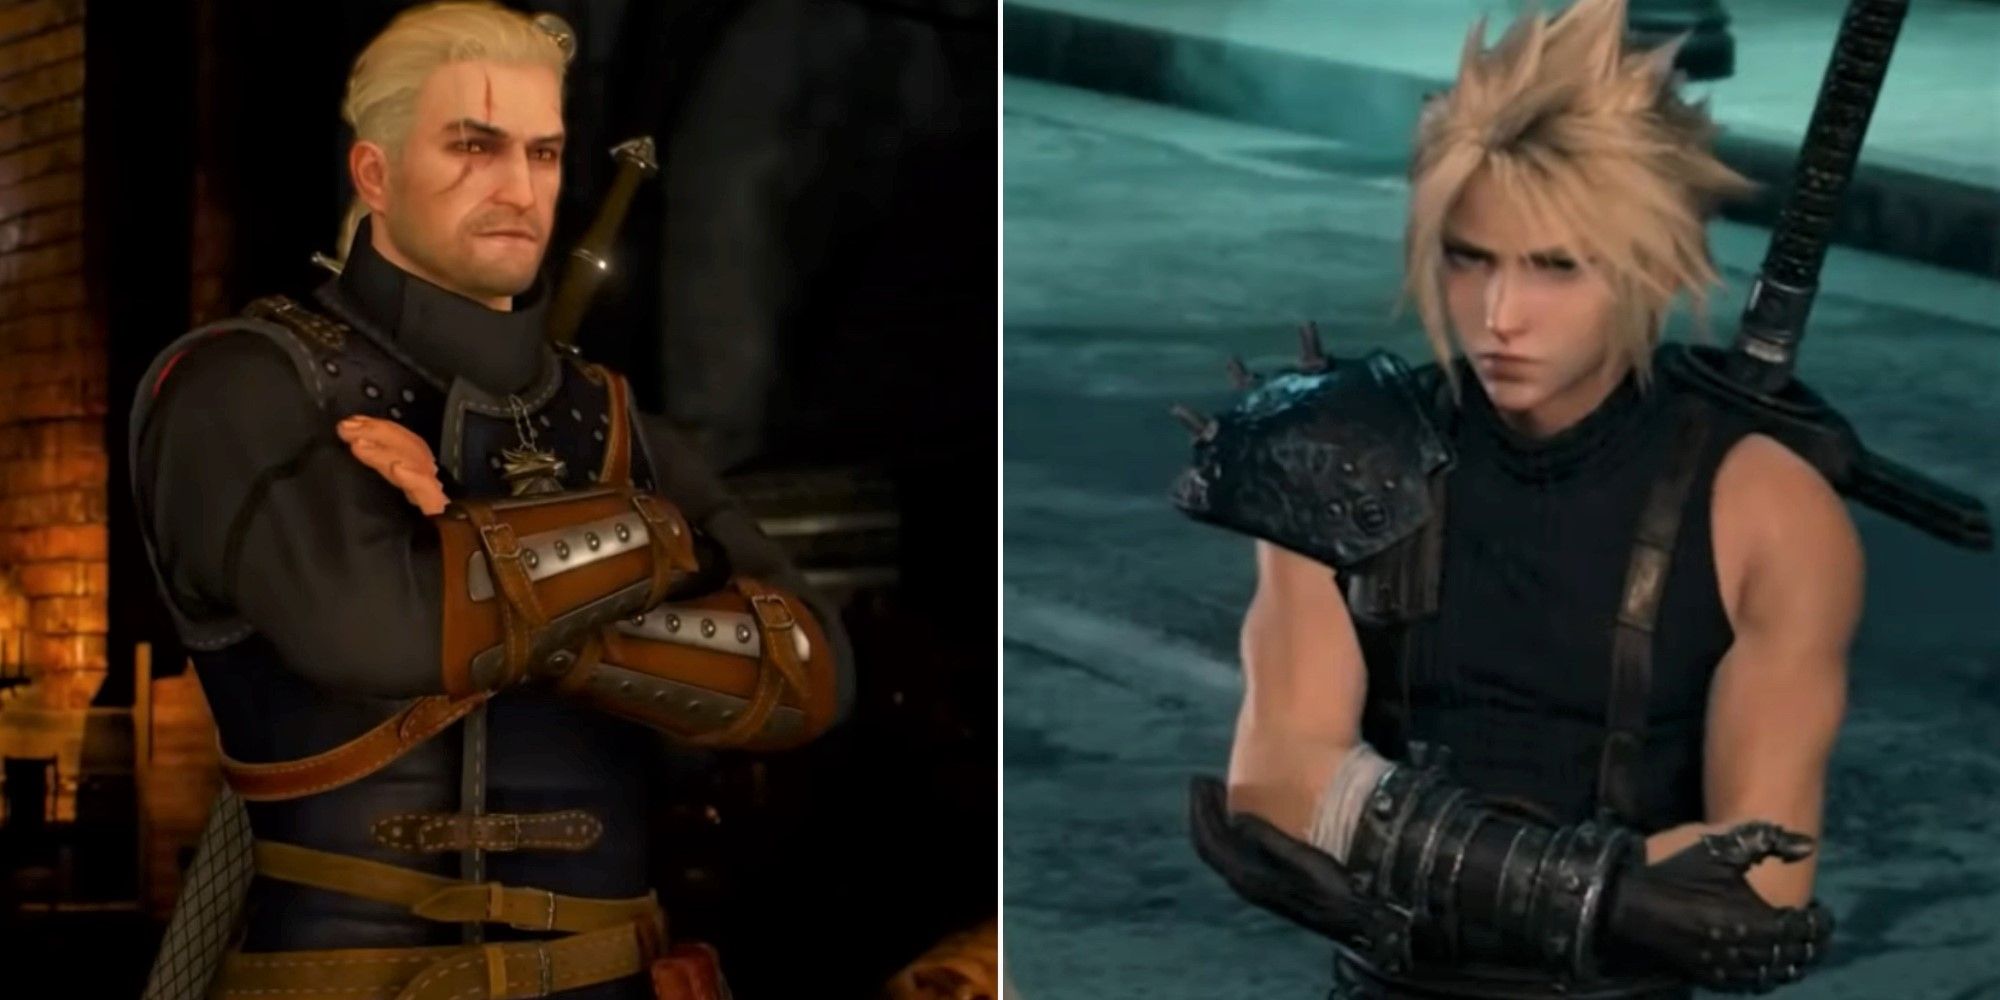 Geralt of Rivia (from The Witcher 3) and Cloud Strife (from Final Fantasy 7 Remake) standing up and crossing their arms